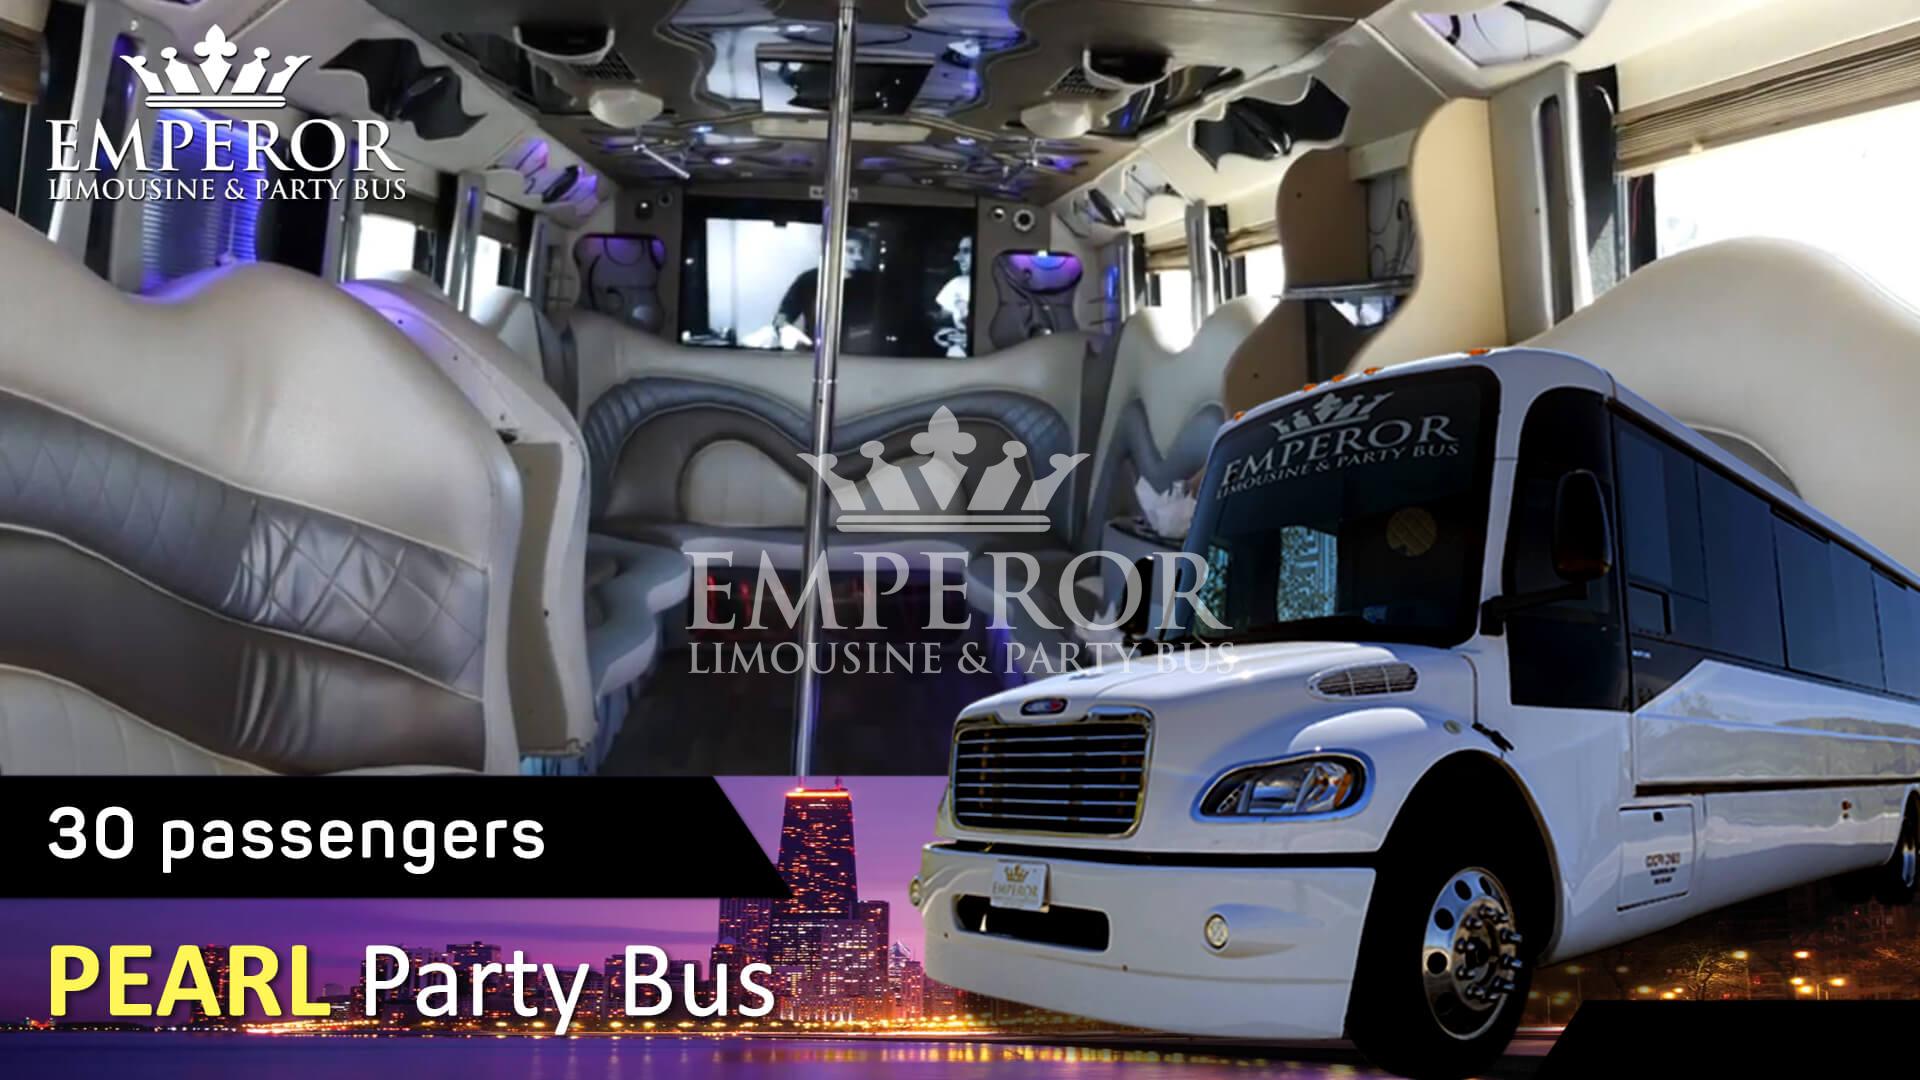 Berwyn party bus services - Pearl Edition